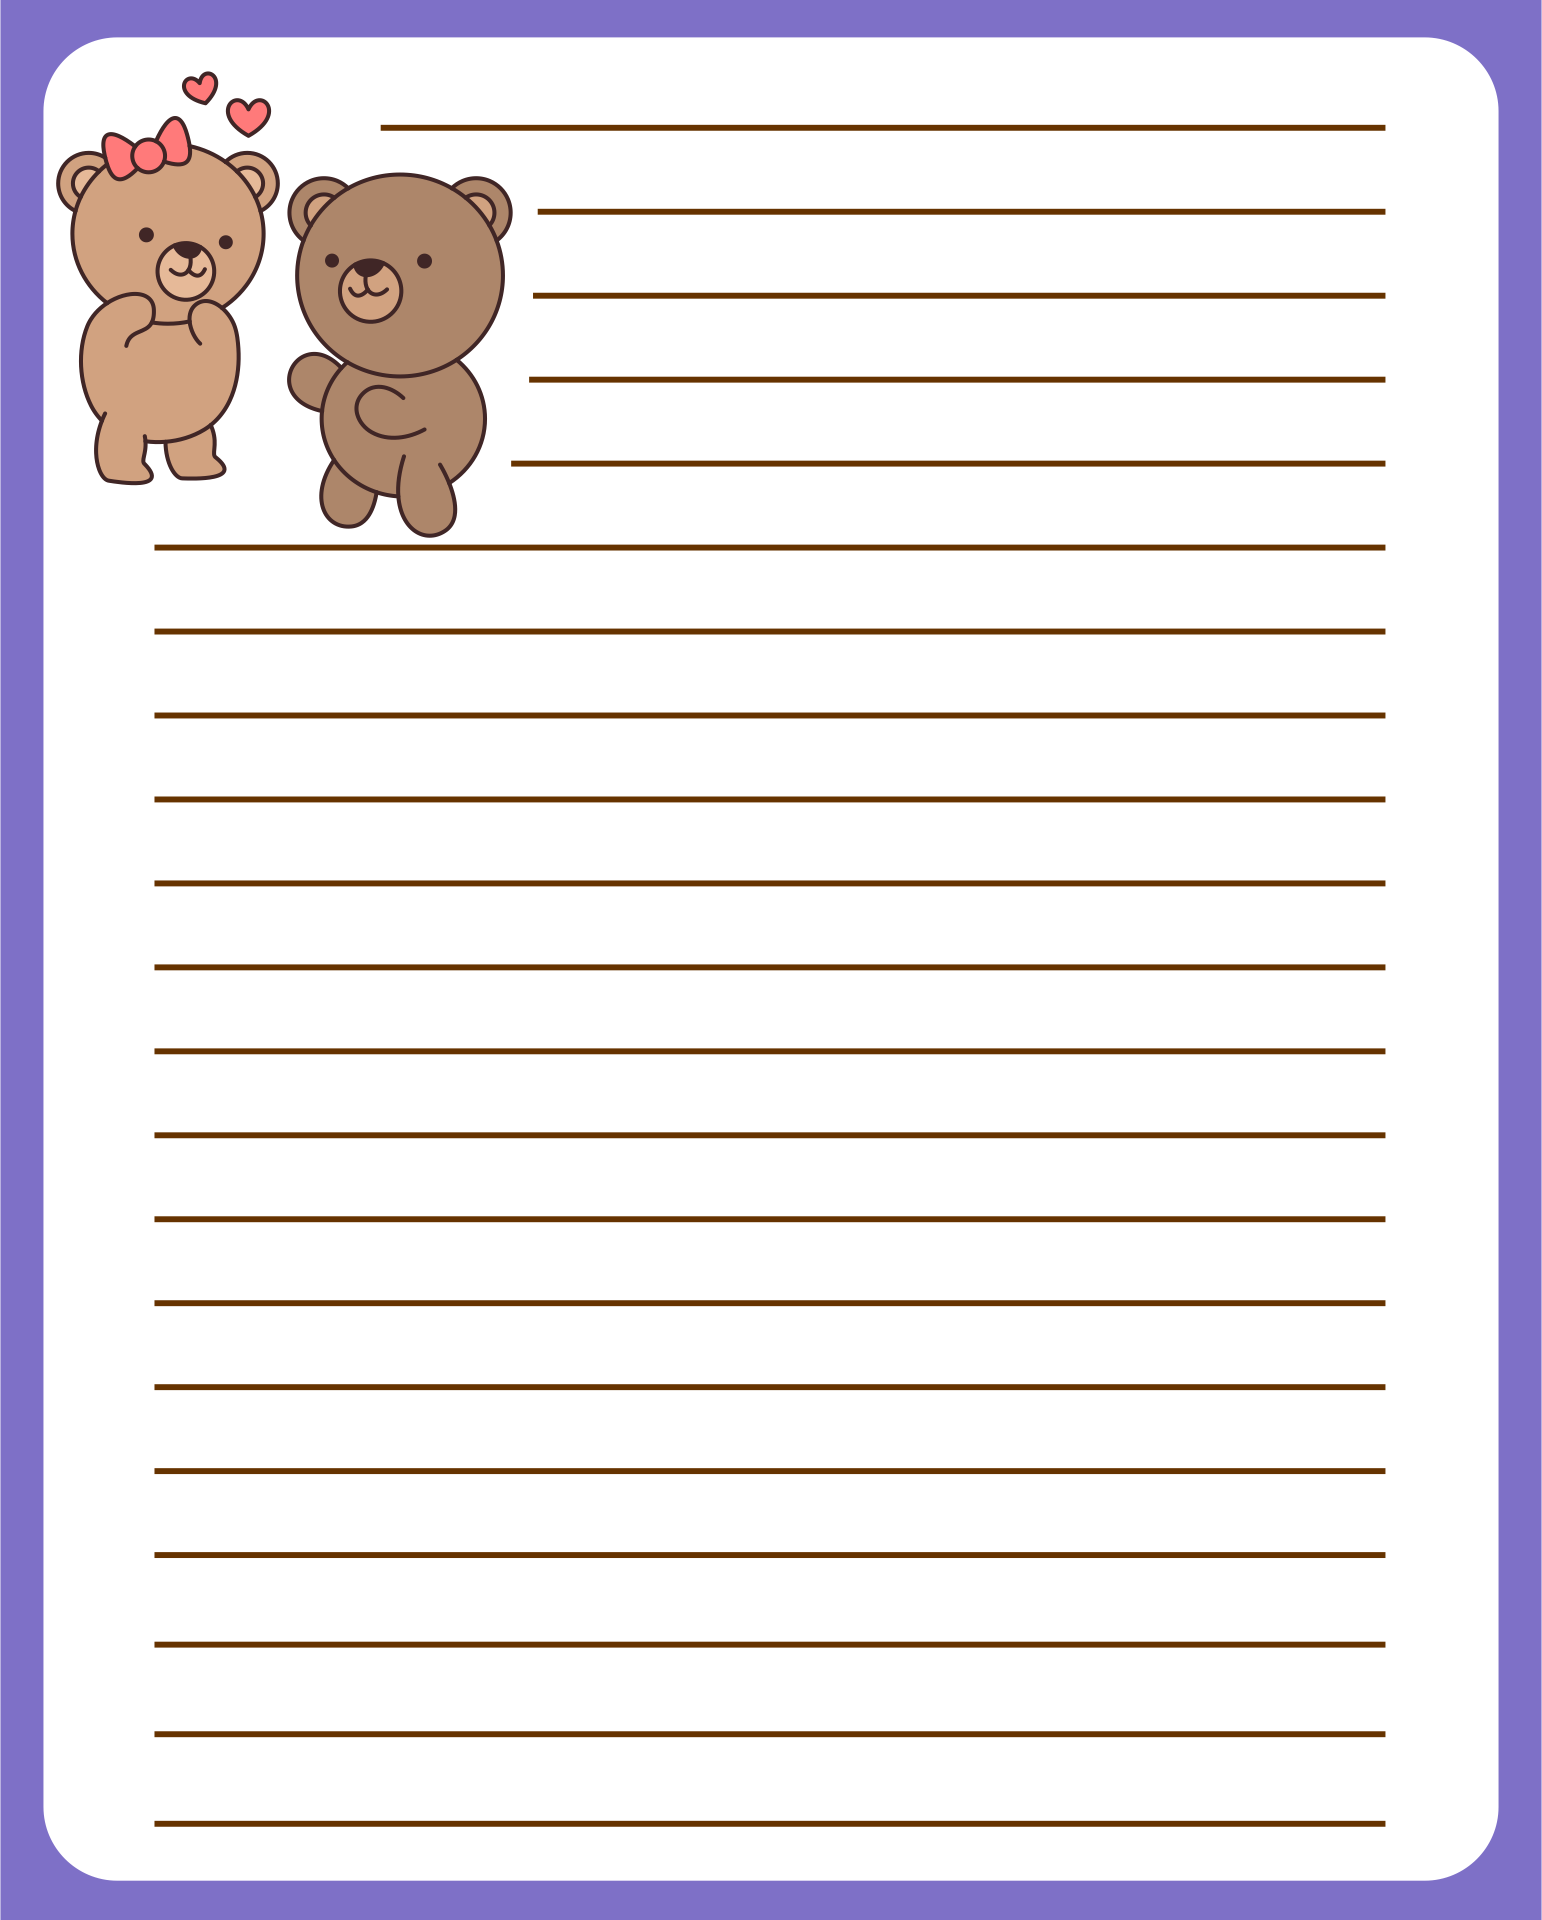 writing-paper-print-free-printable-lined-writing-paper-with-drawing-box-paper-trail-design